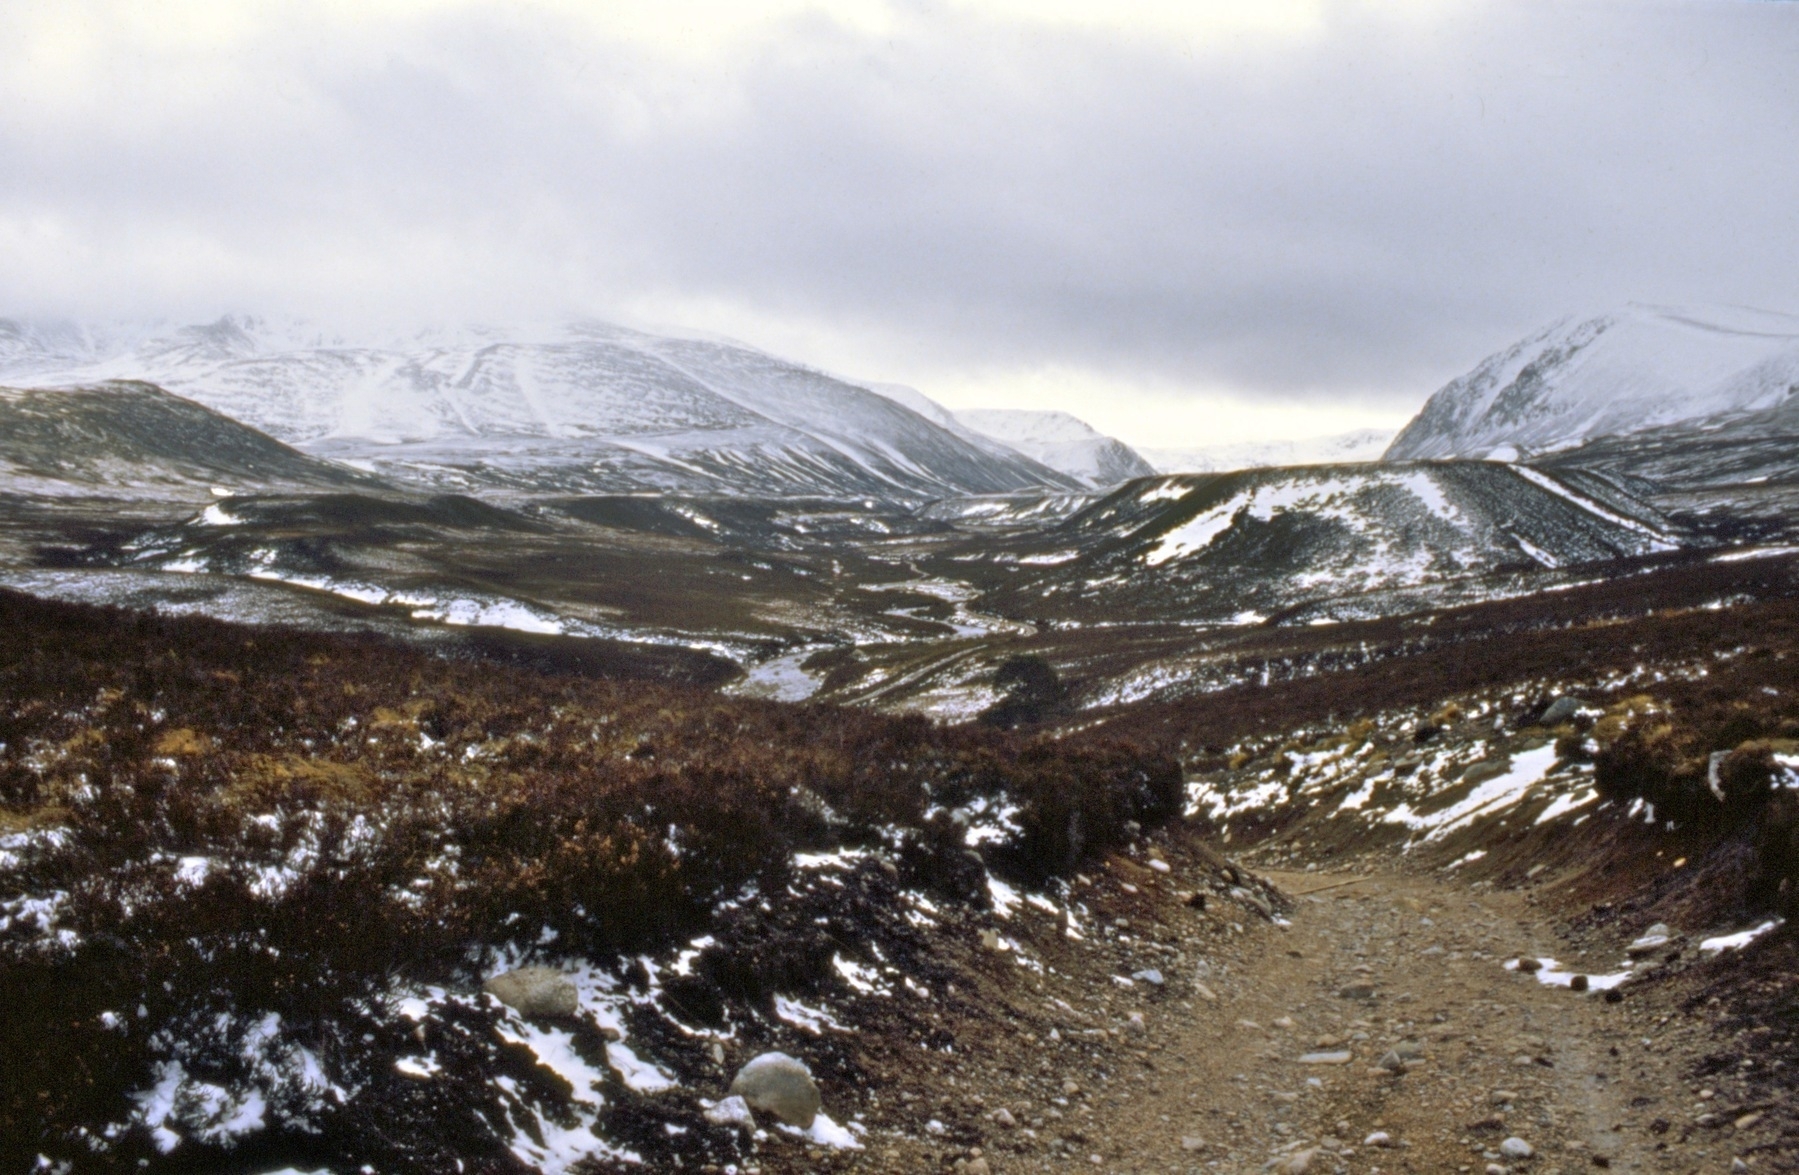 A dirt trail meanders through a snowy mountain landscape with scattered vegetation under an overcast sky.